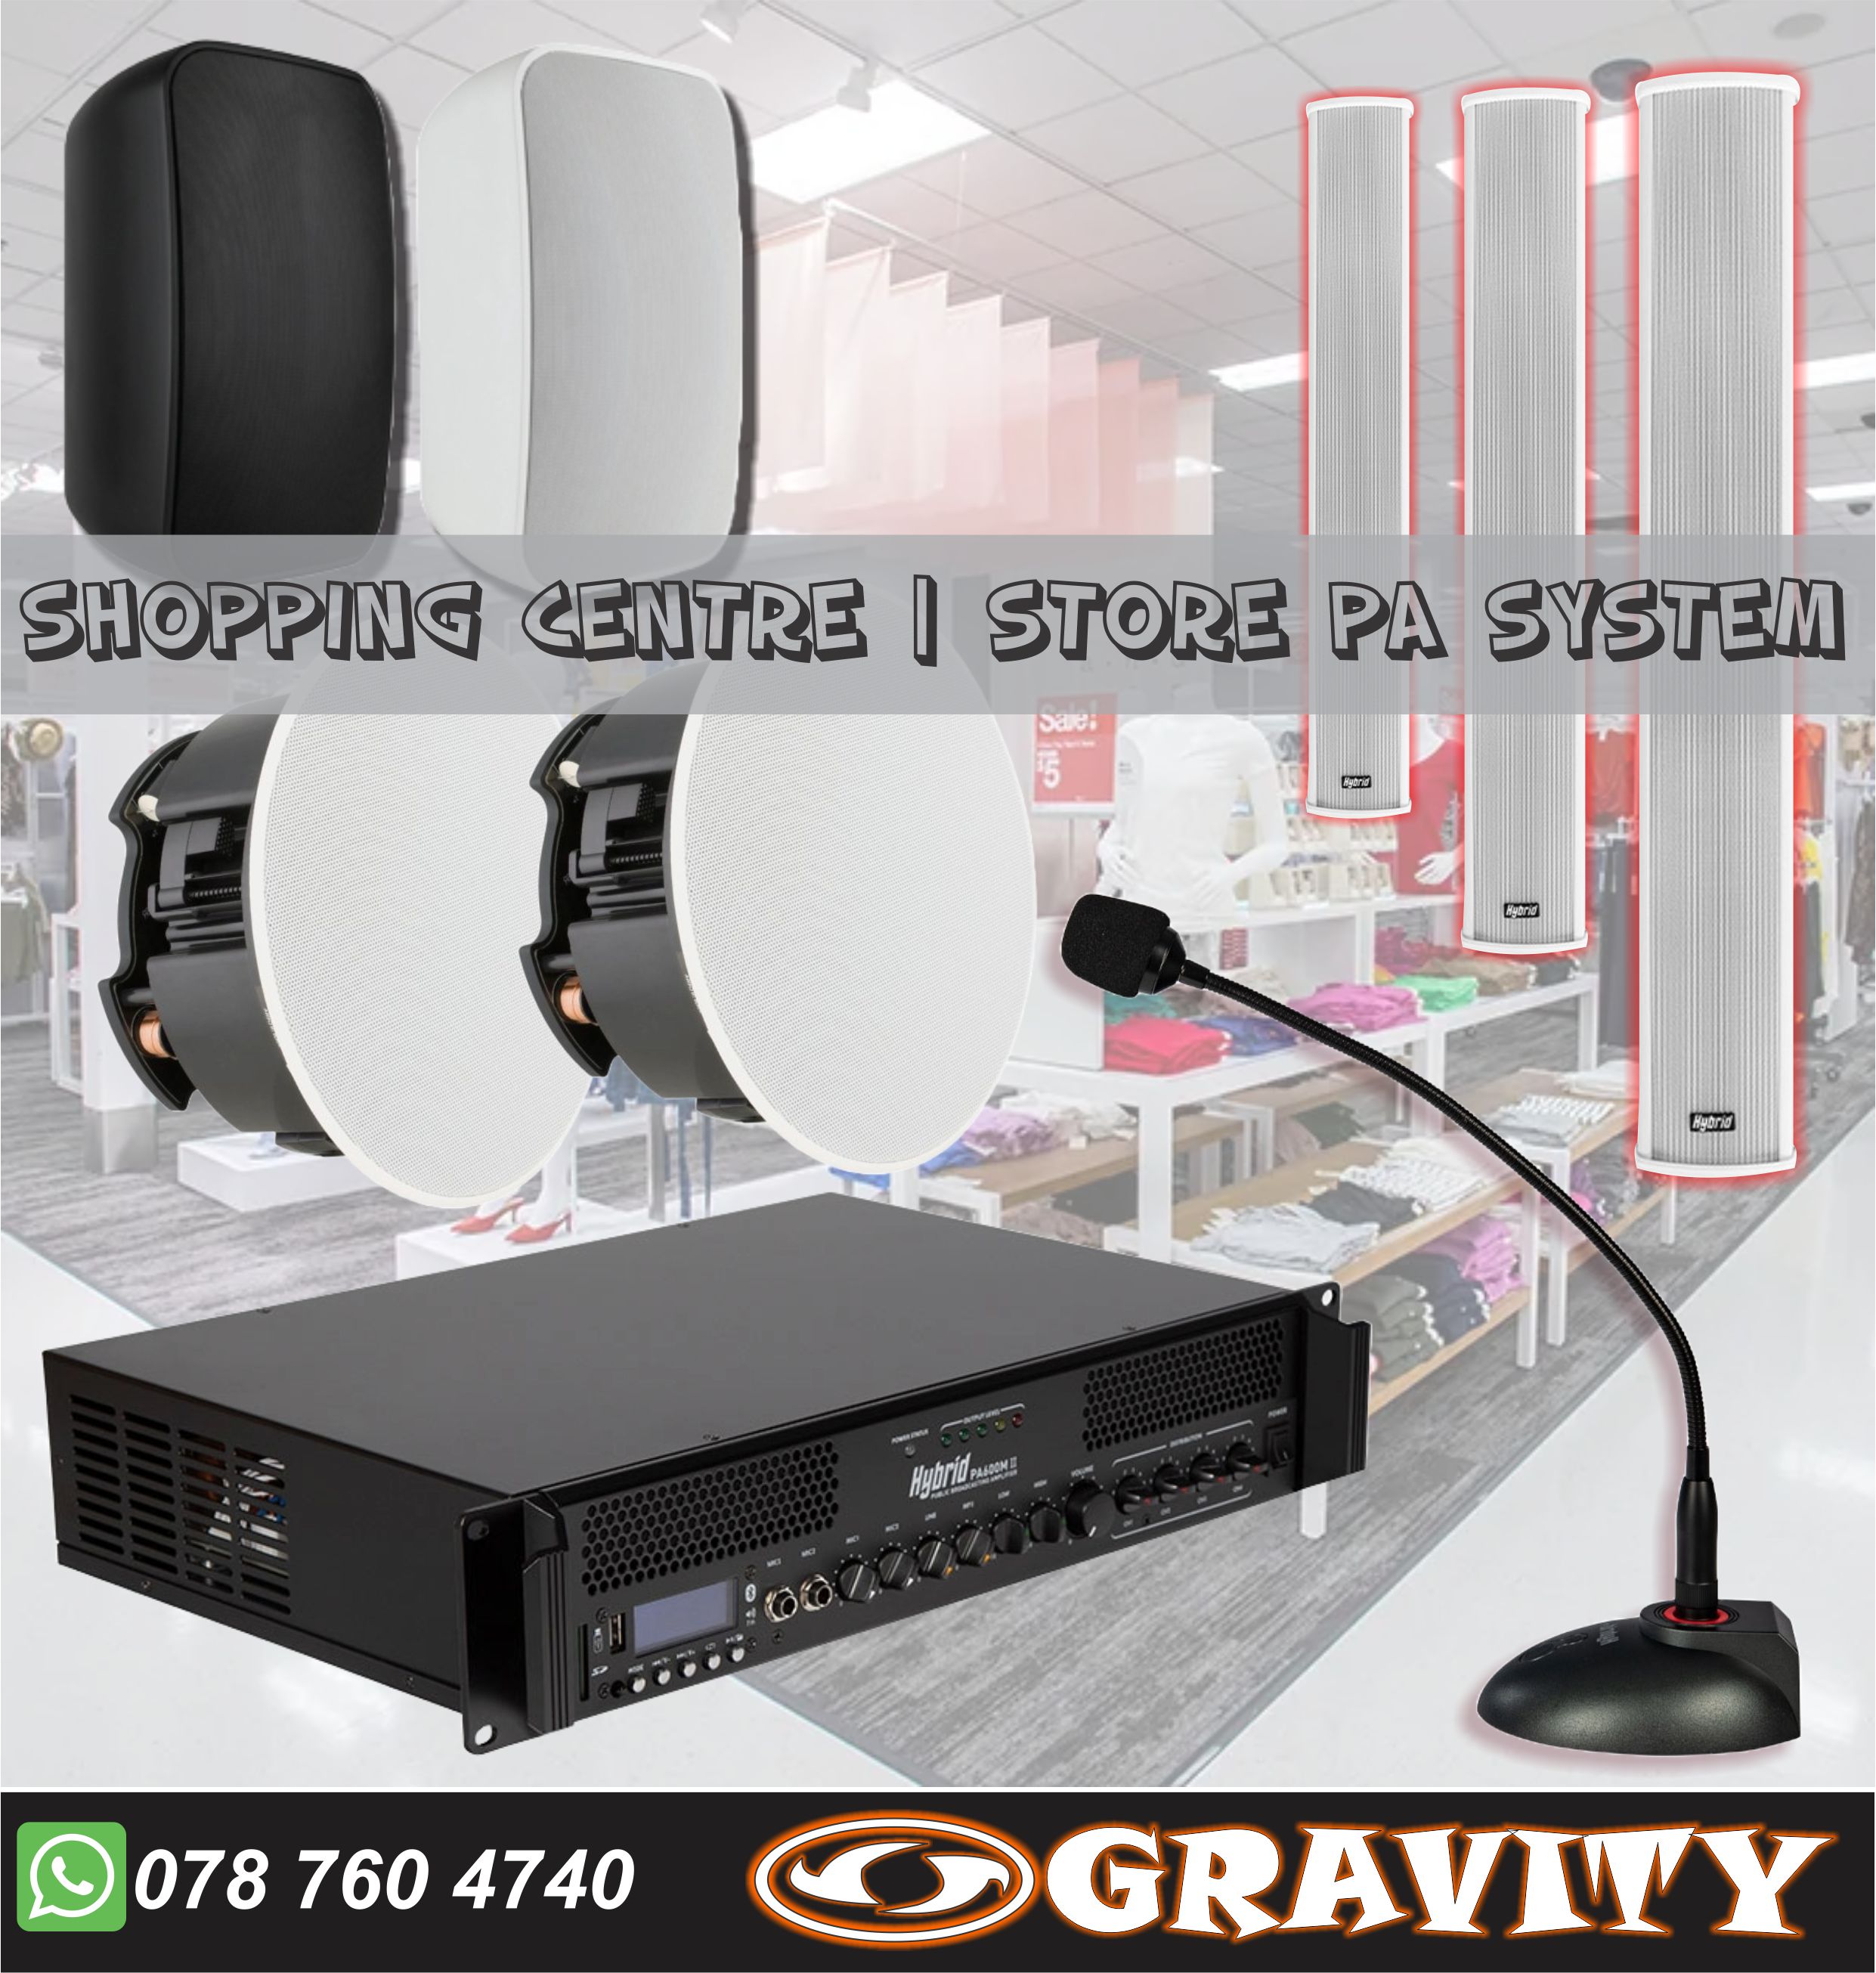 public address pa systems  paging systems  intercom system  pa systems  announcement systems   gravity durban  pa horn loudhailer systems 